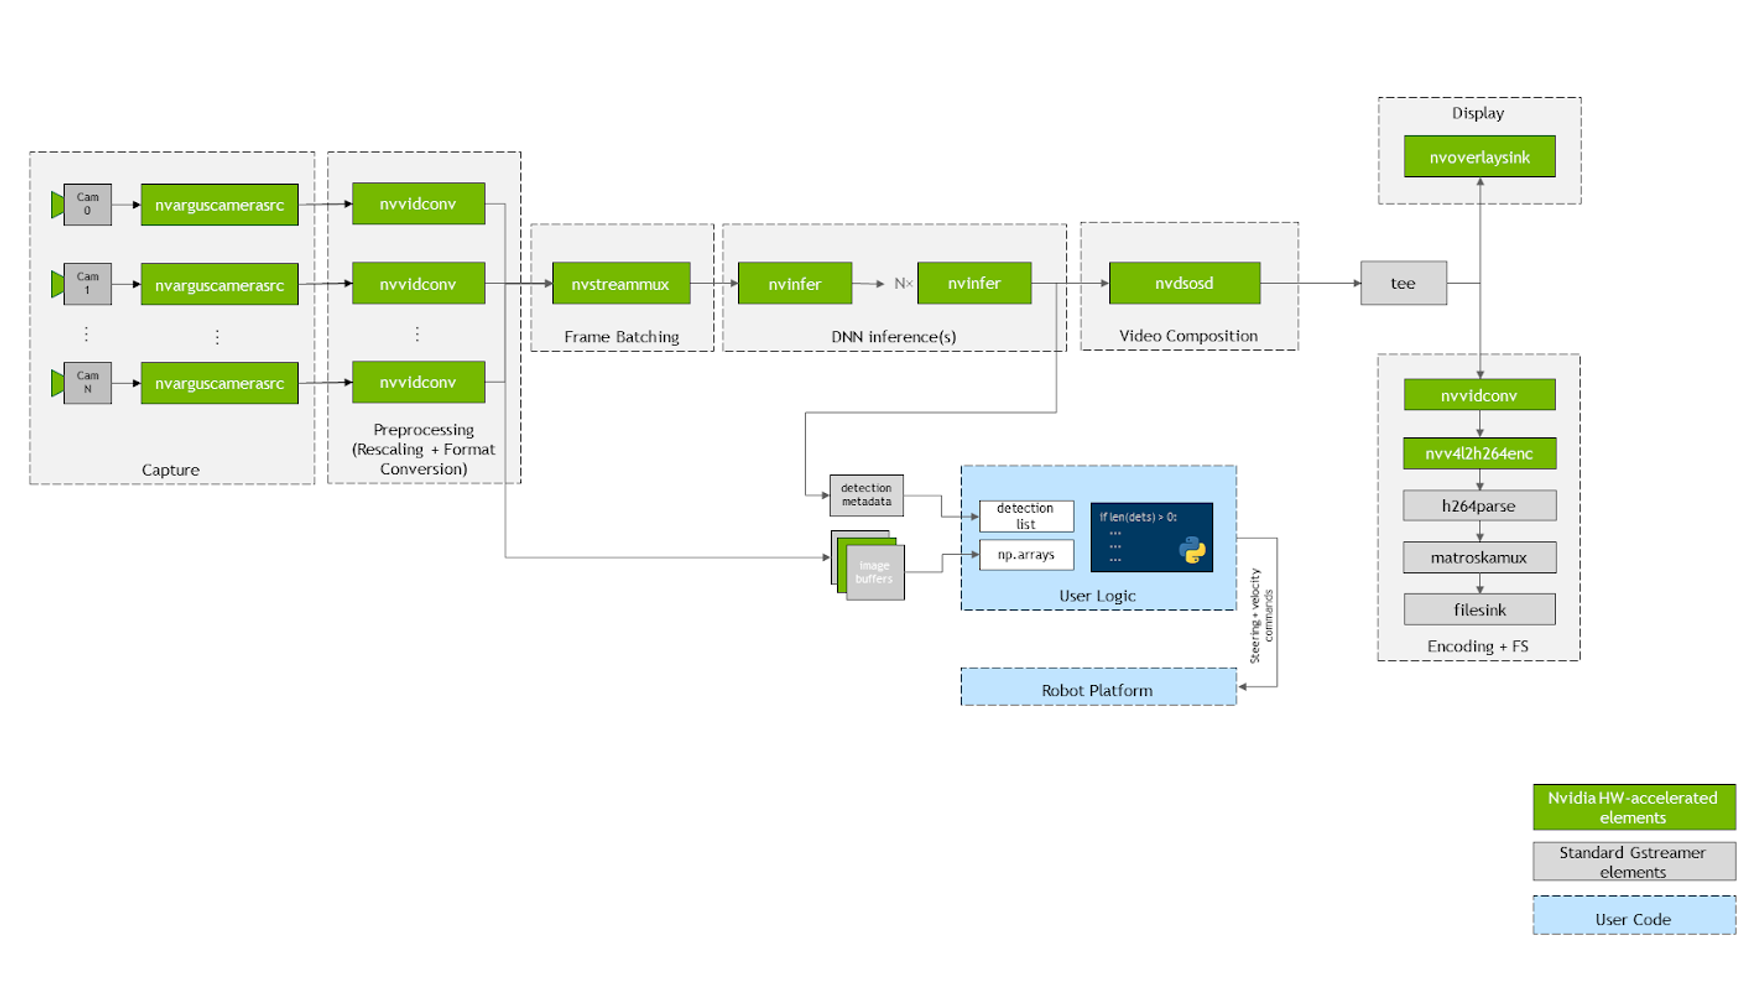 Block diagram contains color-coded elements of the computer vision pipeline. Most elements are green, representing the pipeline elements that are NVIDIA hardware-accelerated.